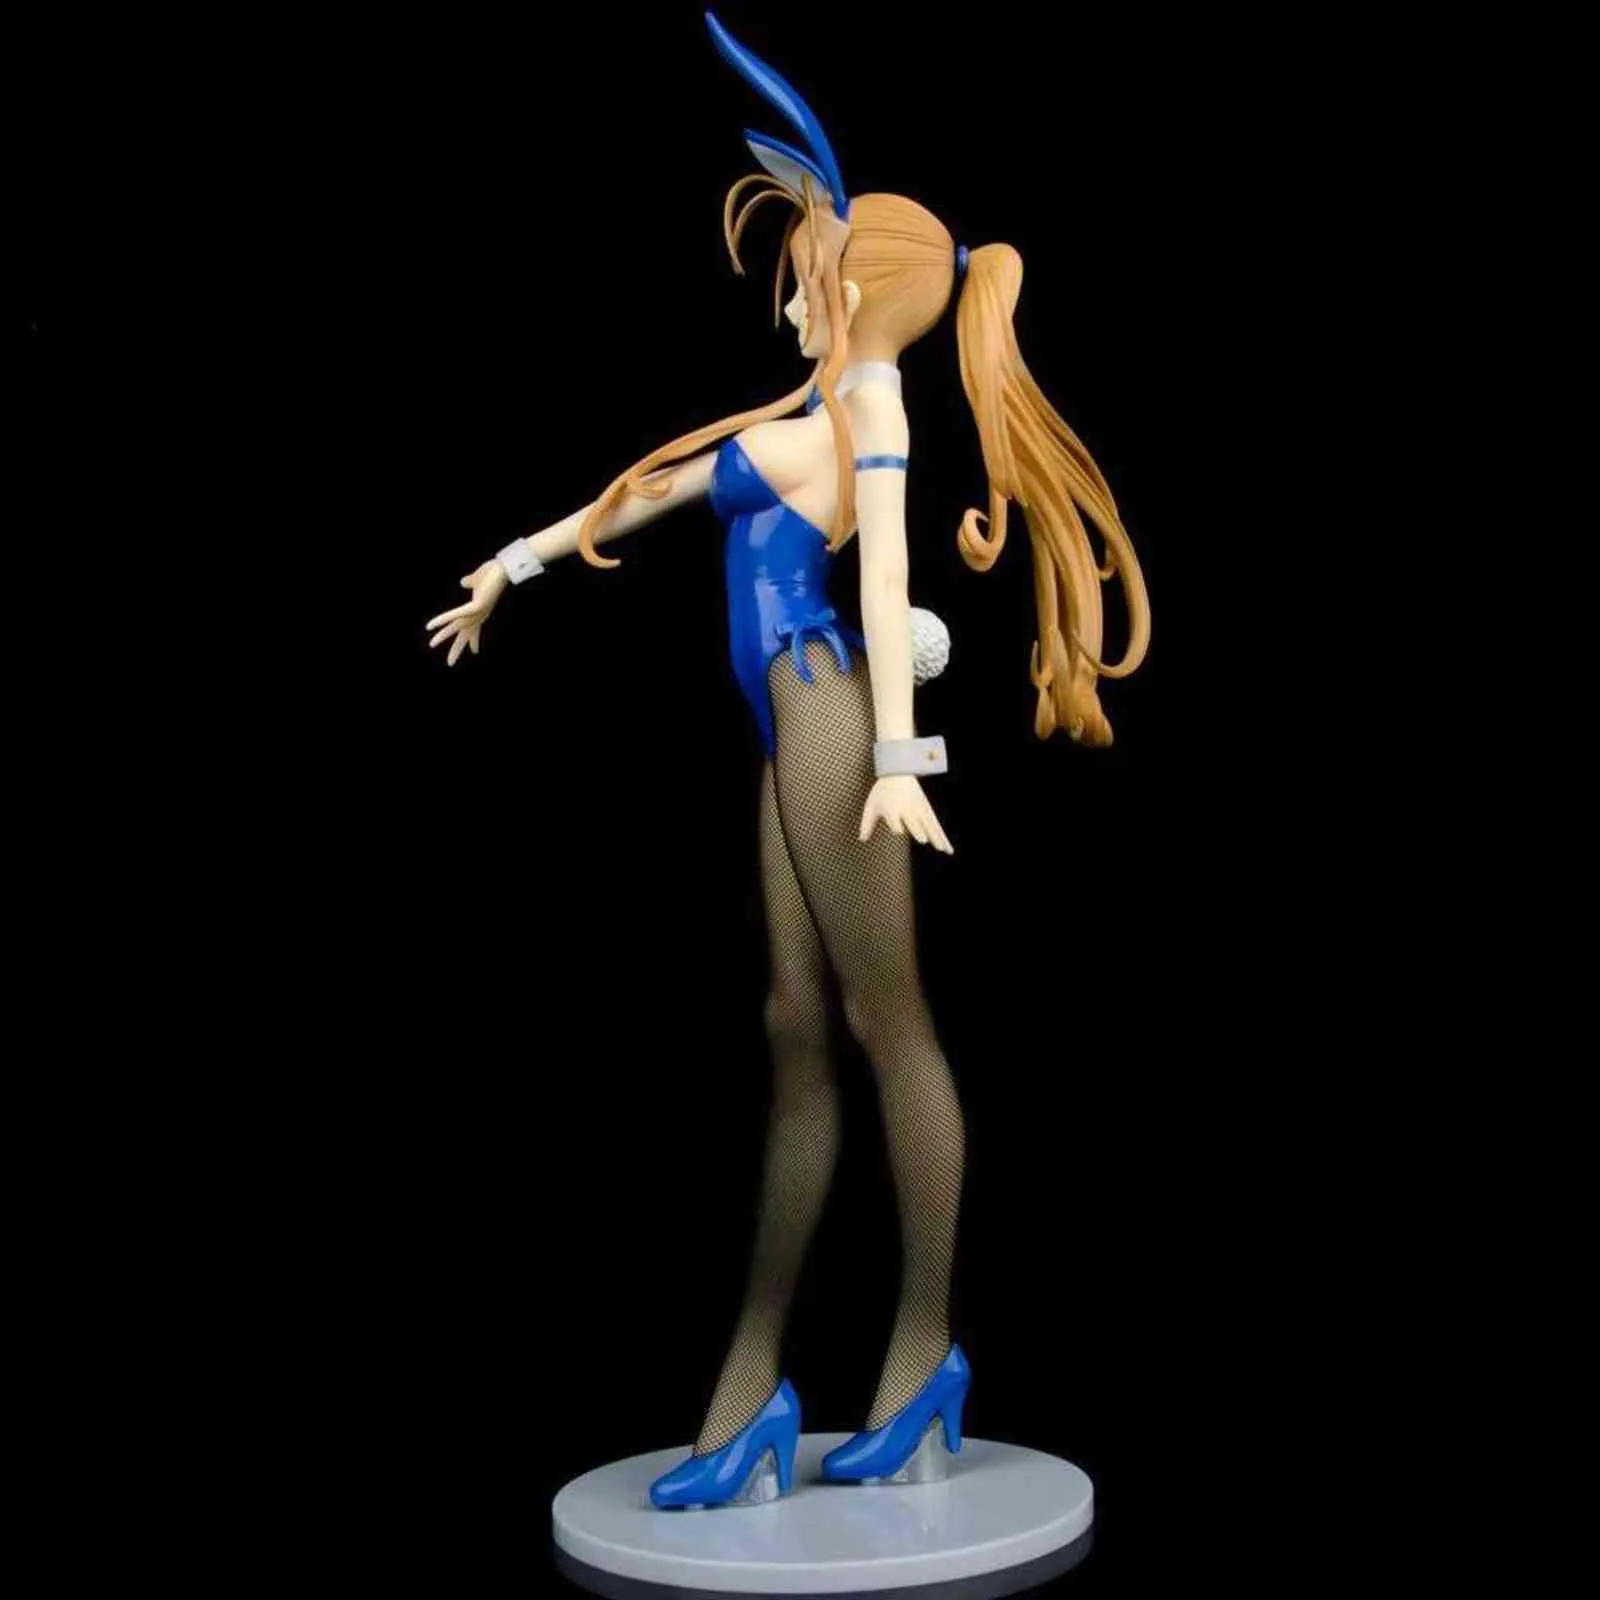 42cm 14 Schaal ing bstyle anime oh mijn godin Belldandy Bunny Girl PVC Actiefiguur Toy Adult Collection Model Doll Gifts H12201383